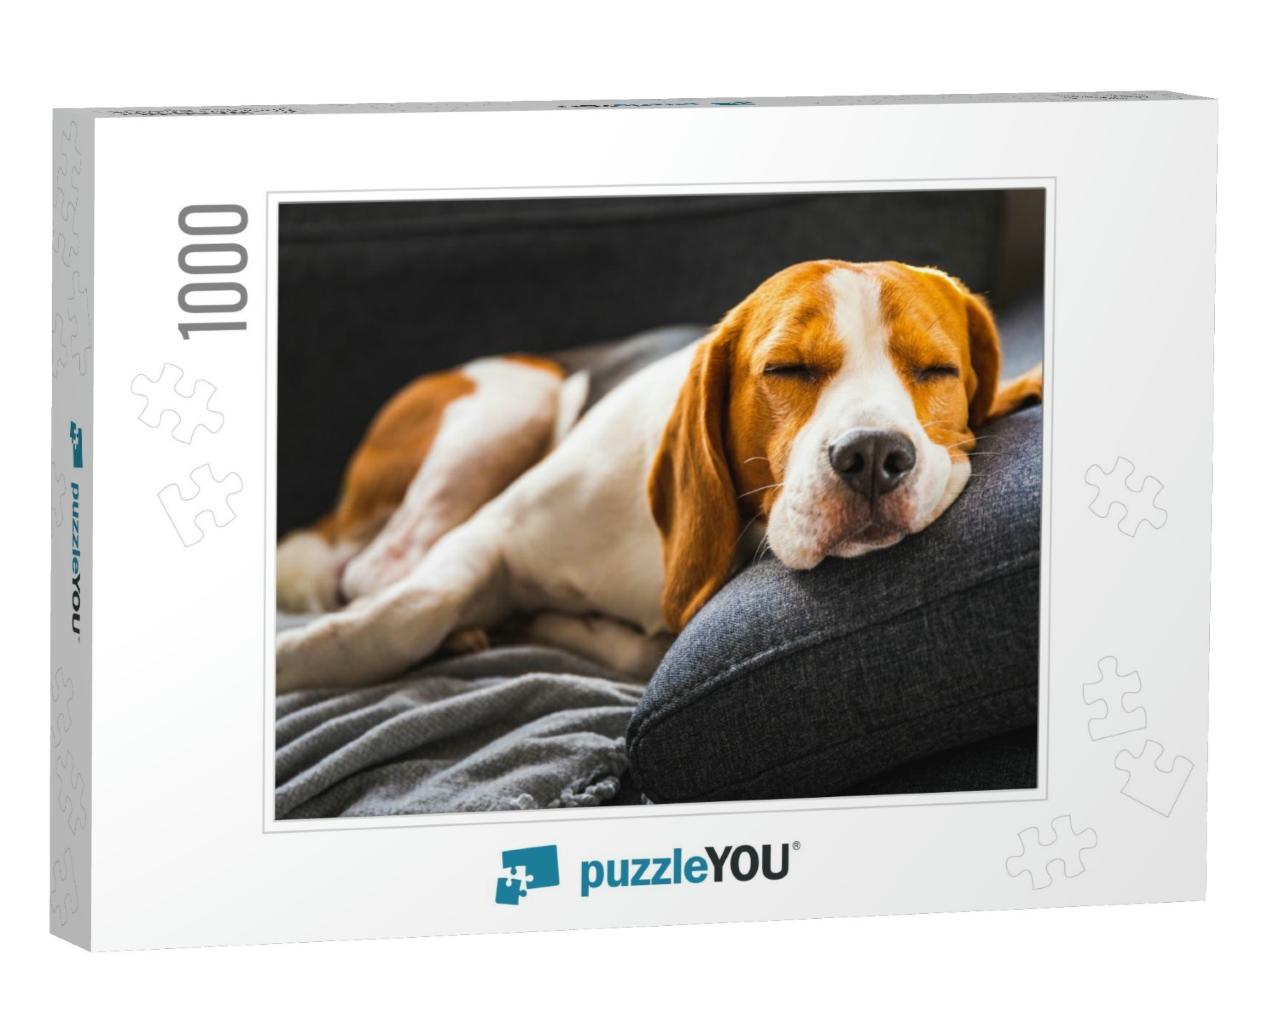 Adorable Beagle Hound in Bright Interior Background. a Pe... Jigsaw Puzzle with 1000 pieces